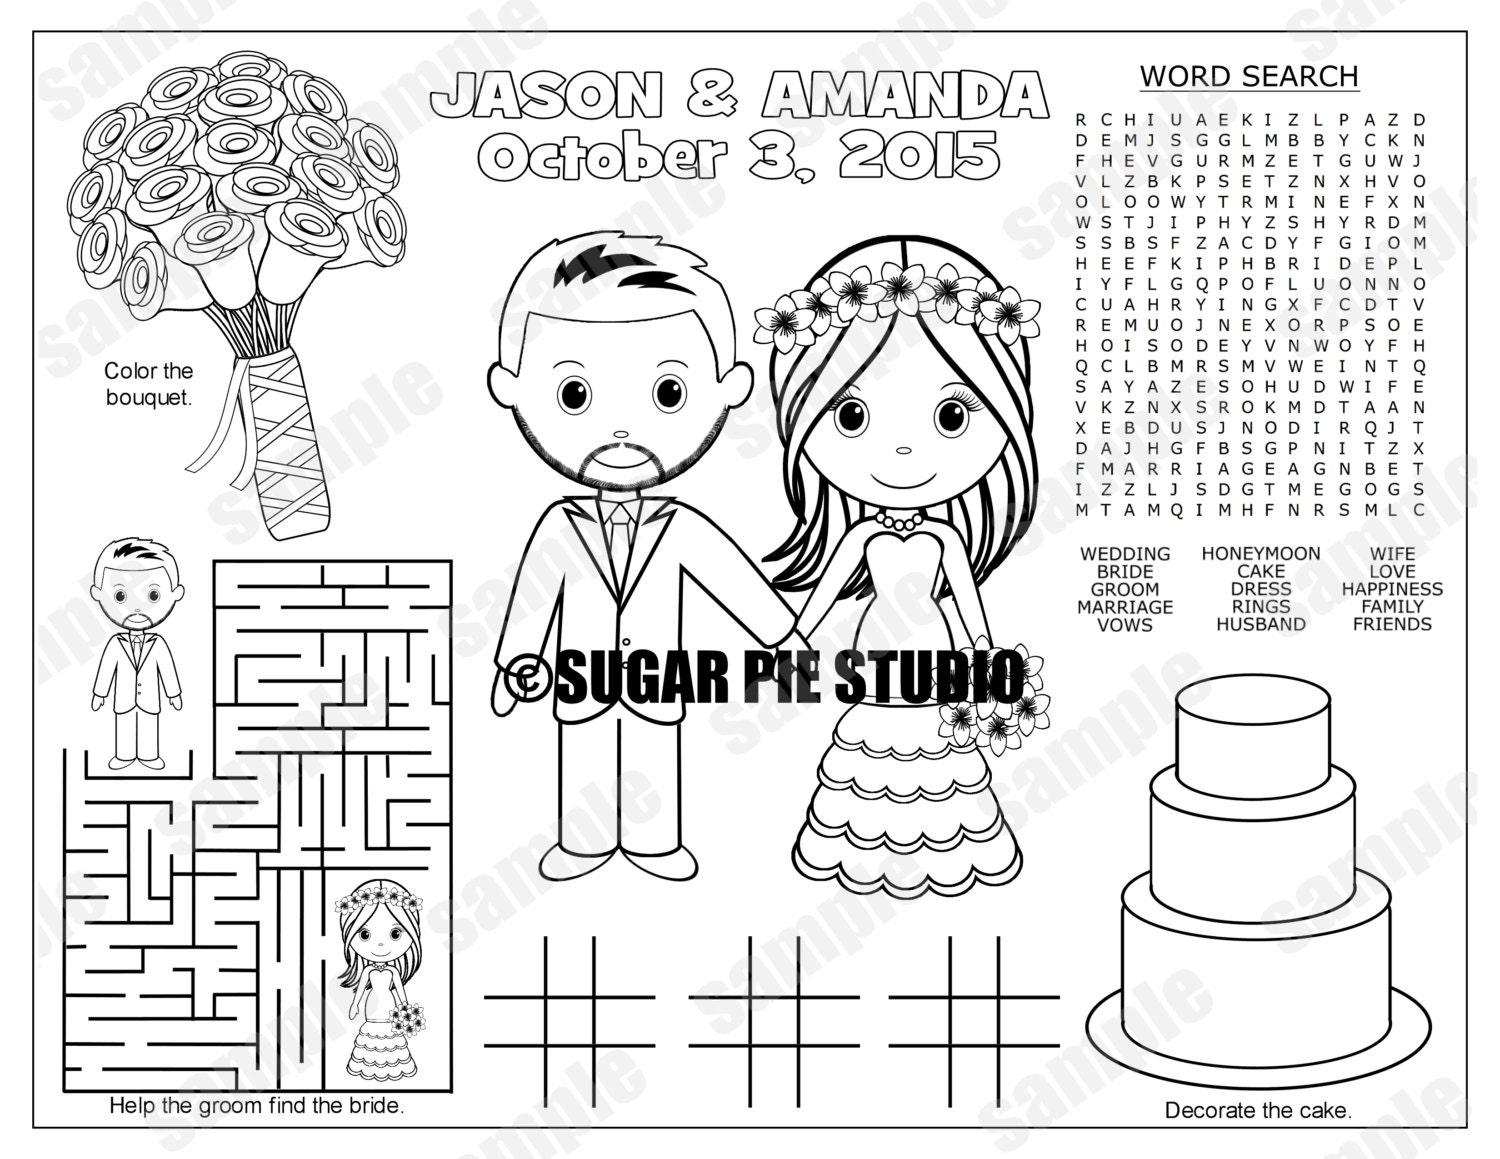 Wedding Favor Childrens Kids Coloring Page Activity picture